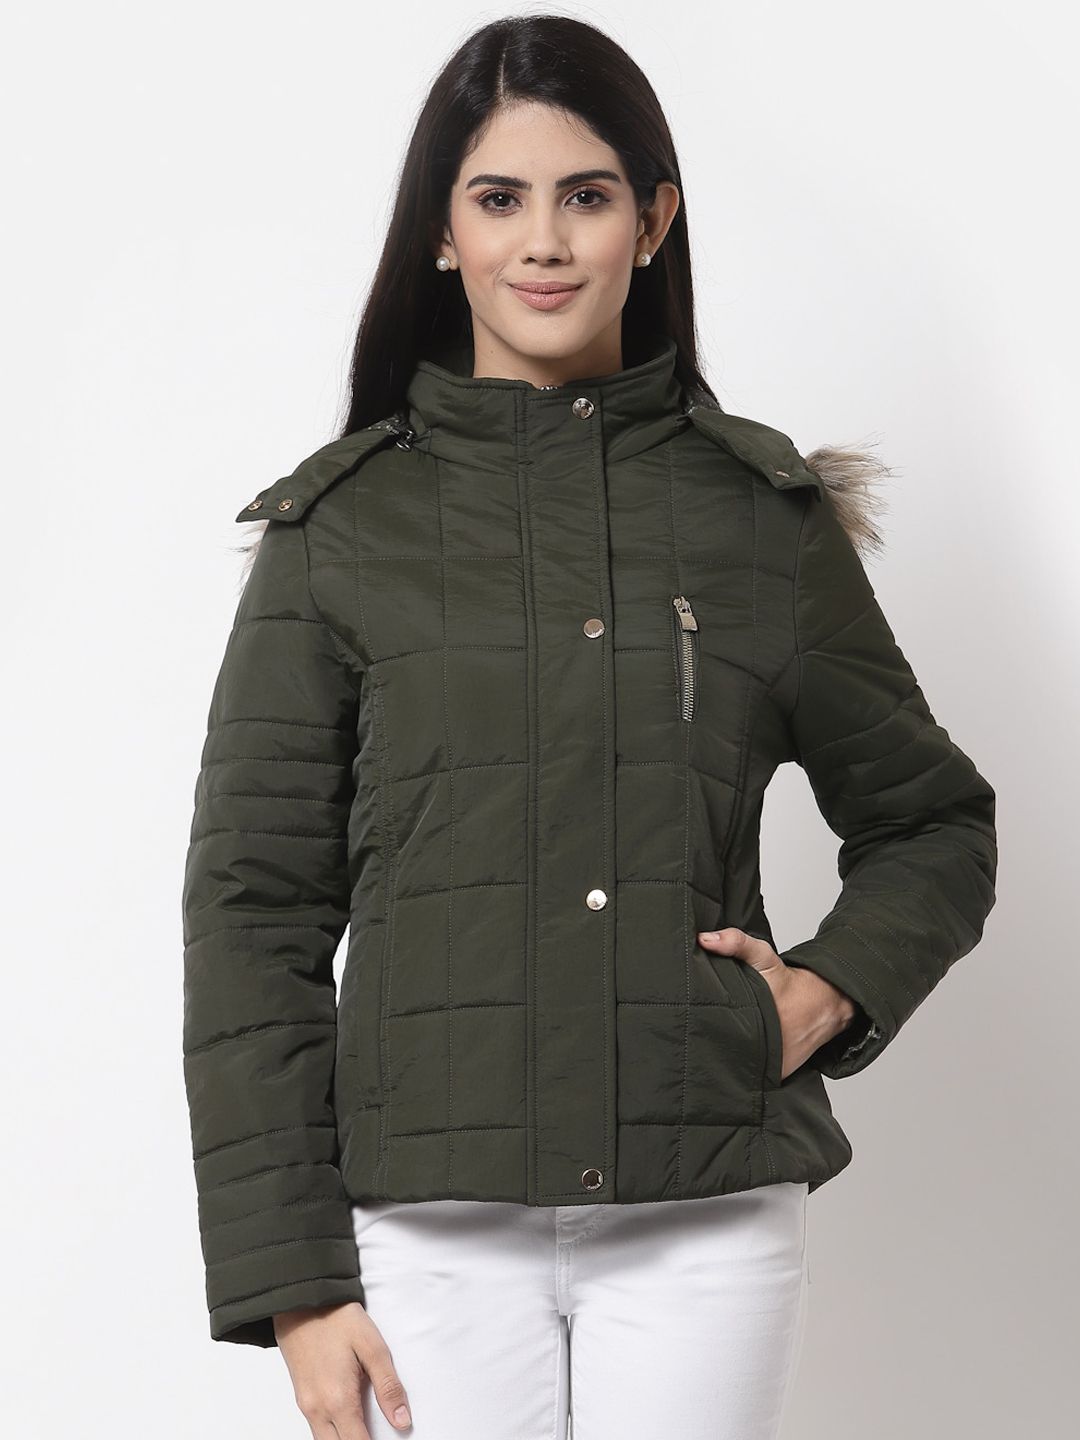 Juelle Women Olive Green Camouflage Parka Jacket Price in India